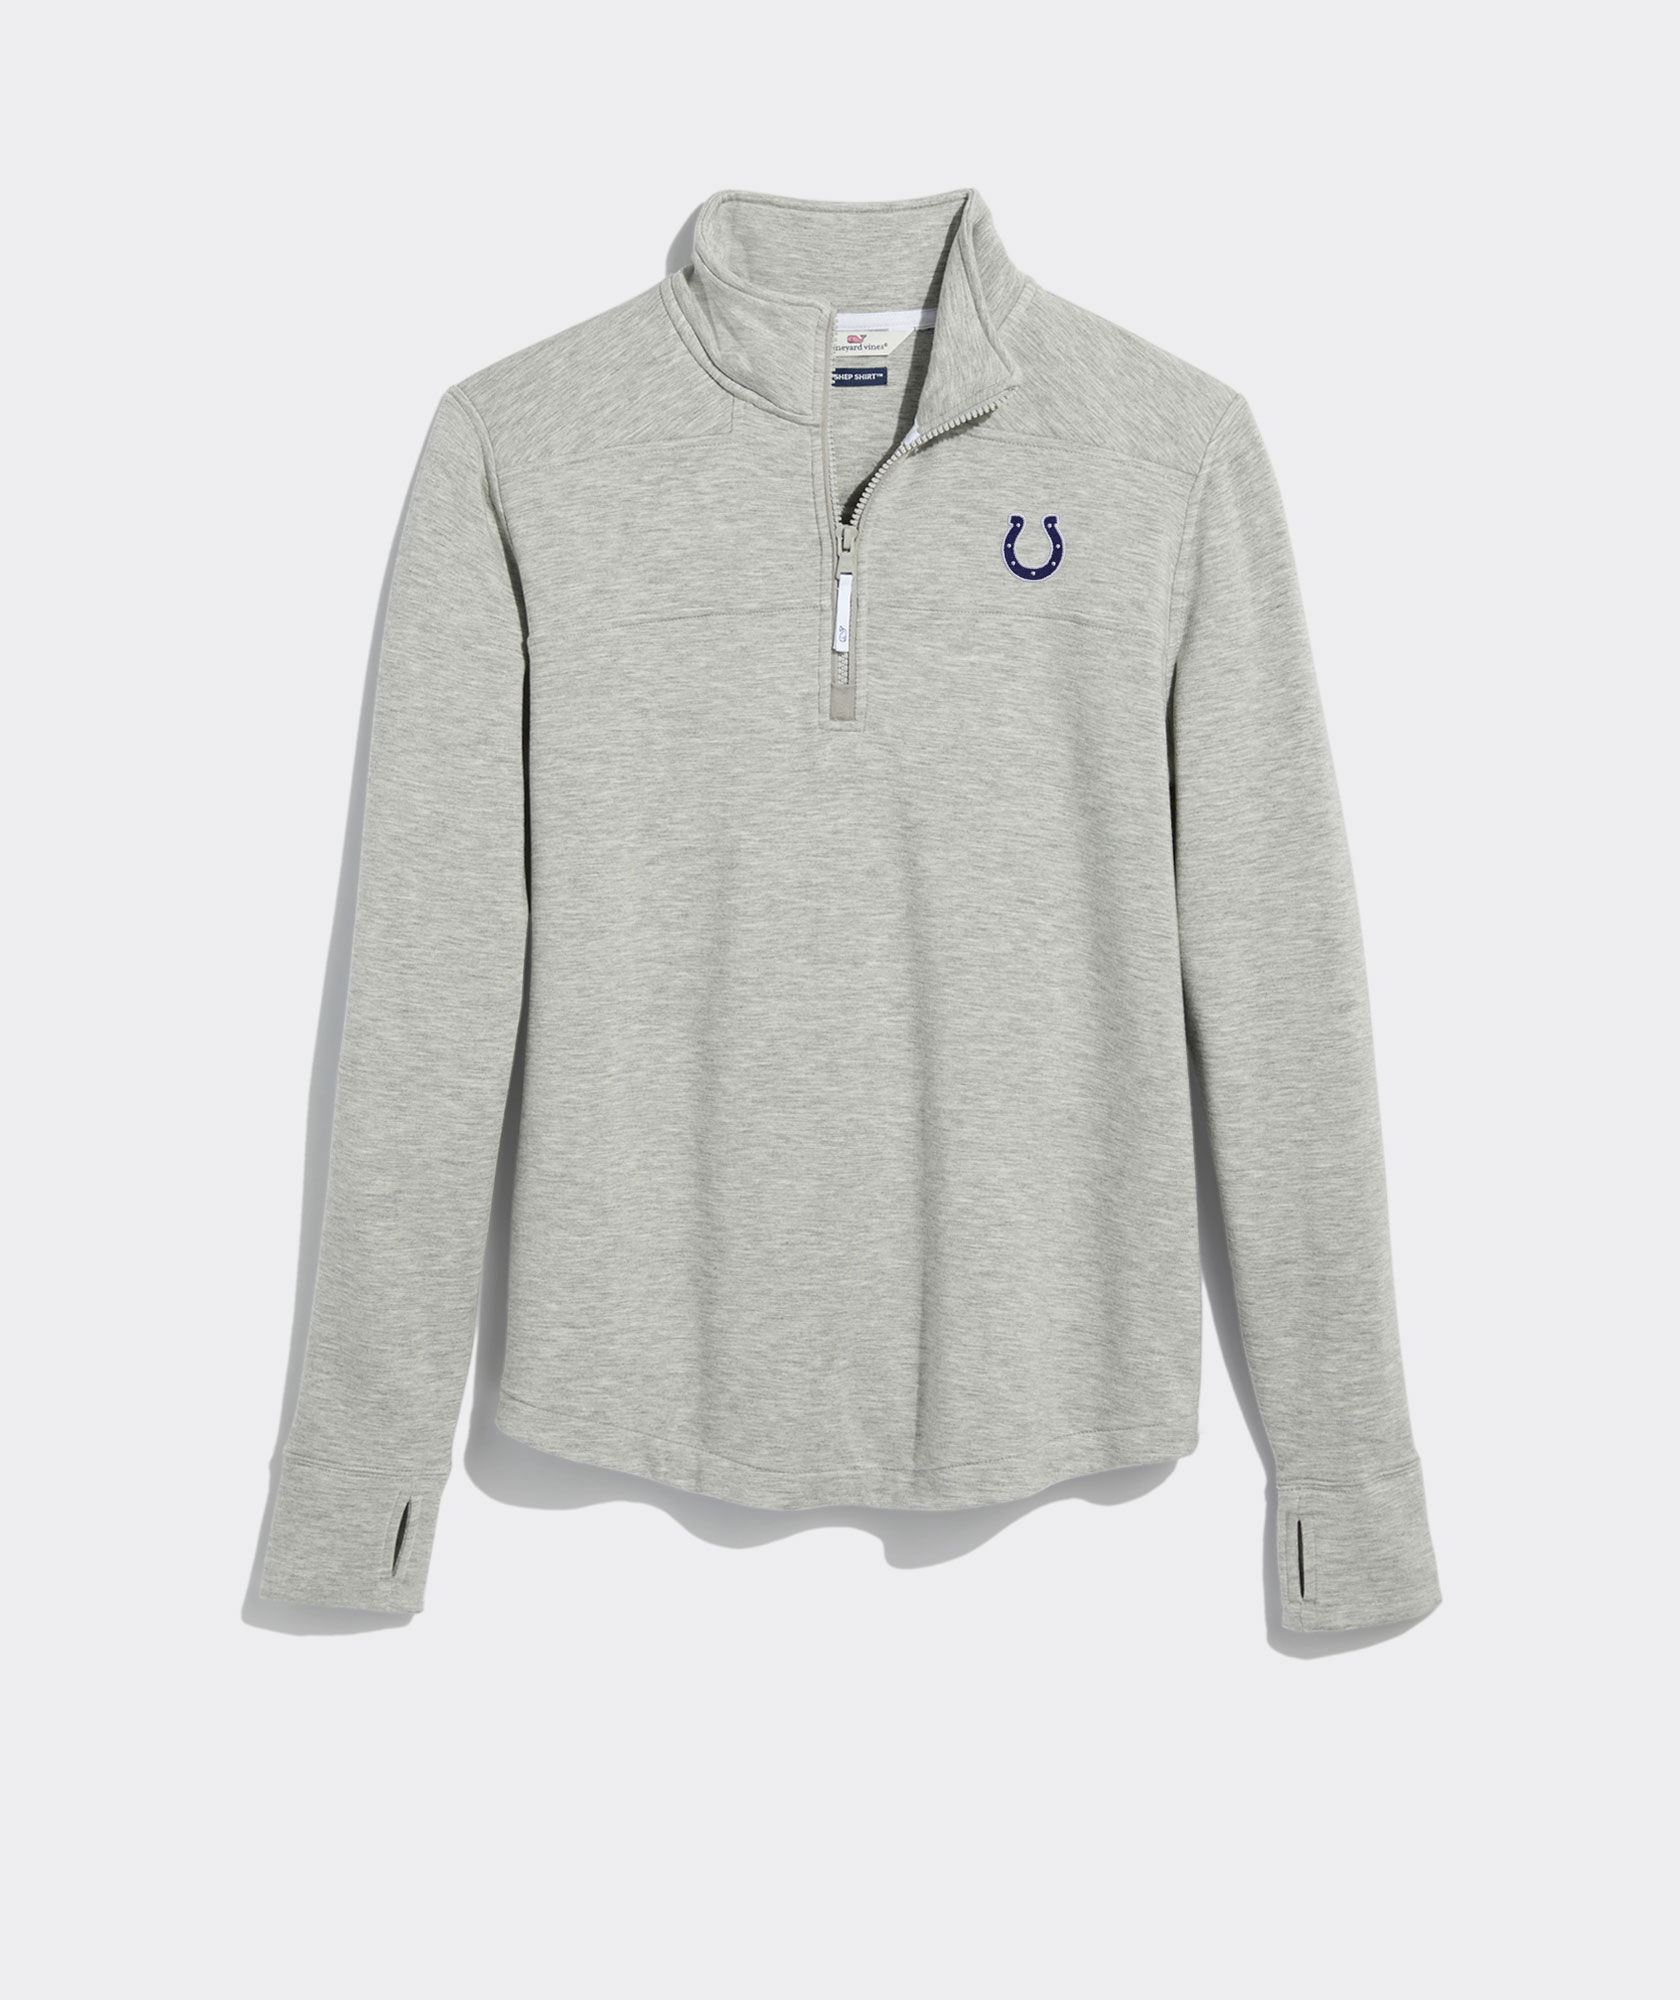 Women's Indianapolis Colts Dreamcloth Shep Shirt™